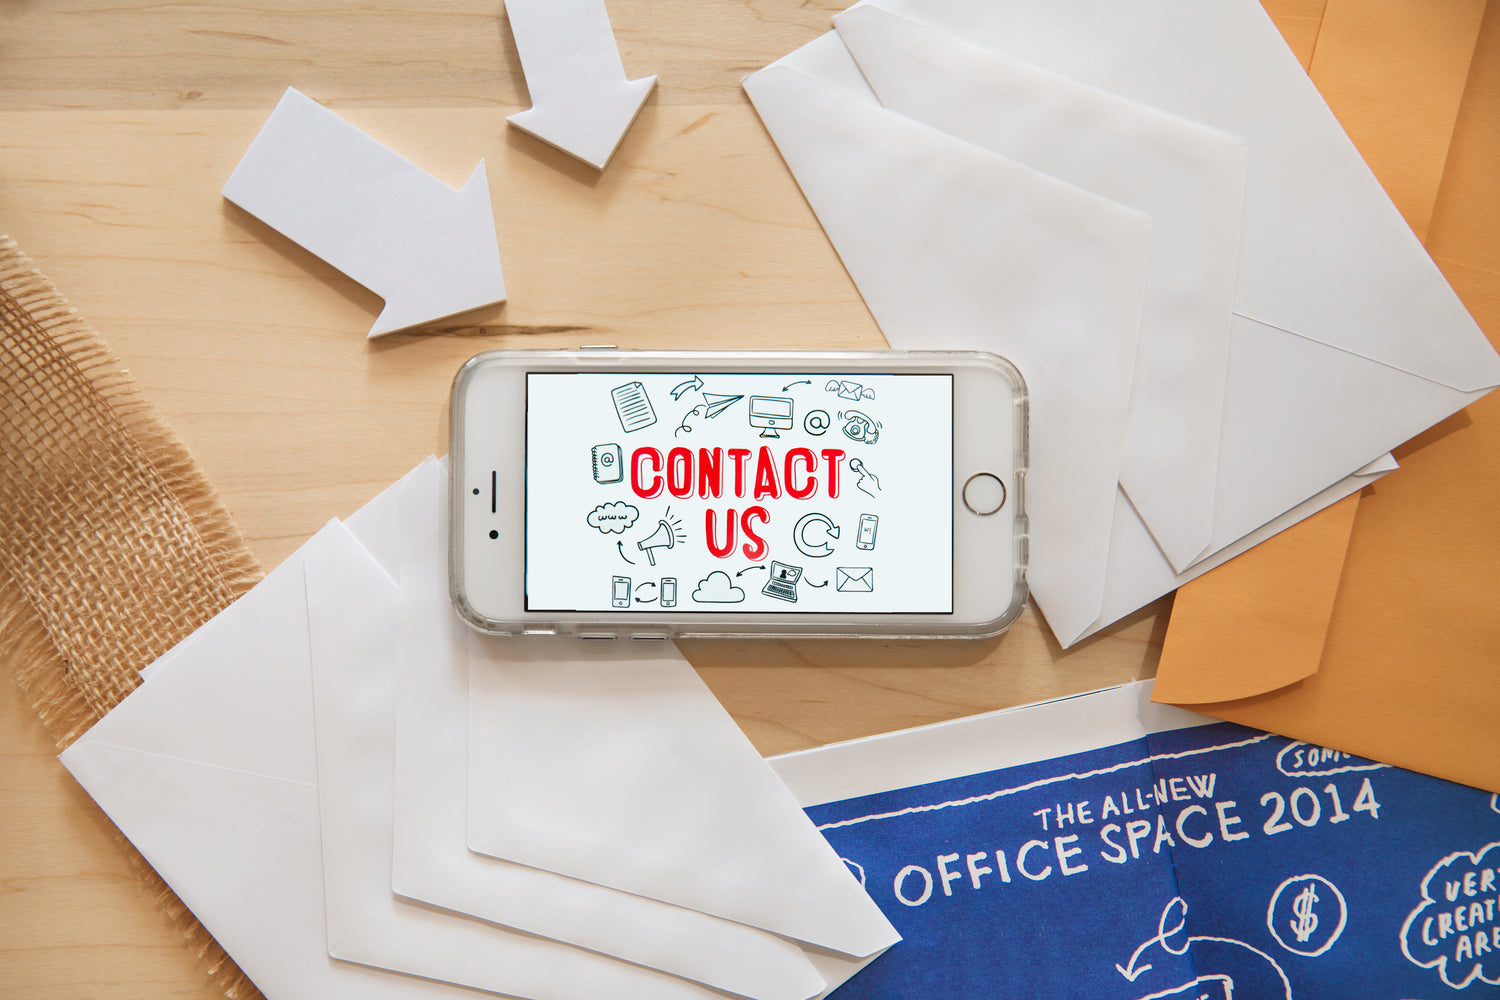 A white iPhone in the center of the image with the text across the screen saying "Contact Us". Envelopes and arrows pointing towards the phone surround it. 